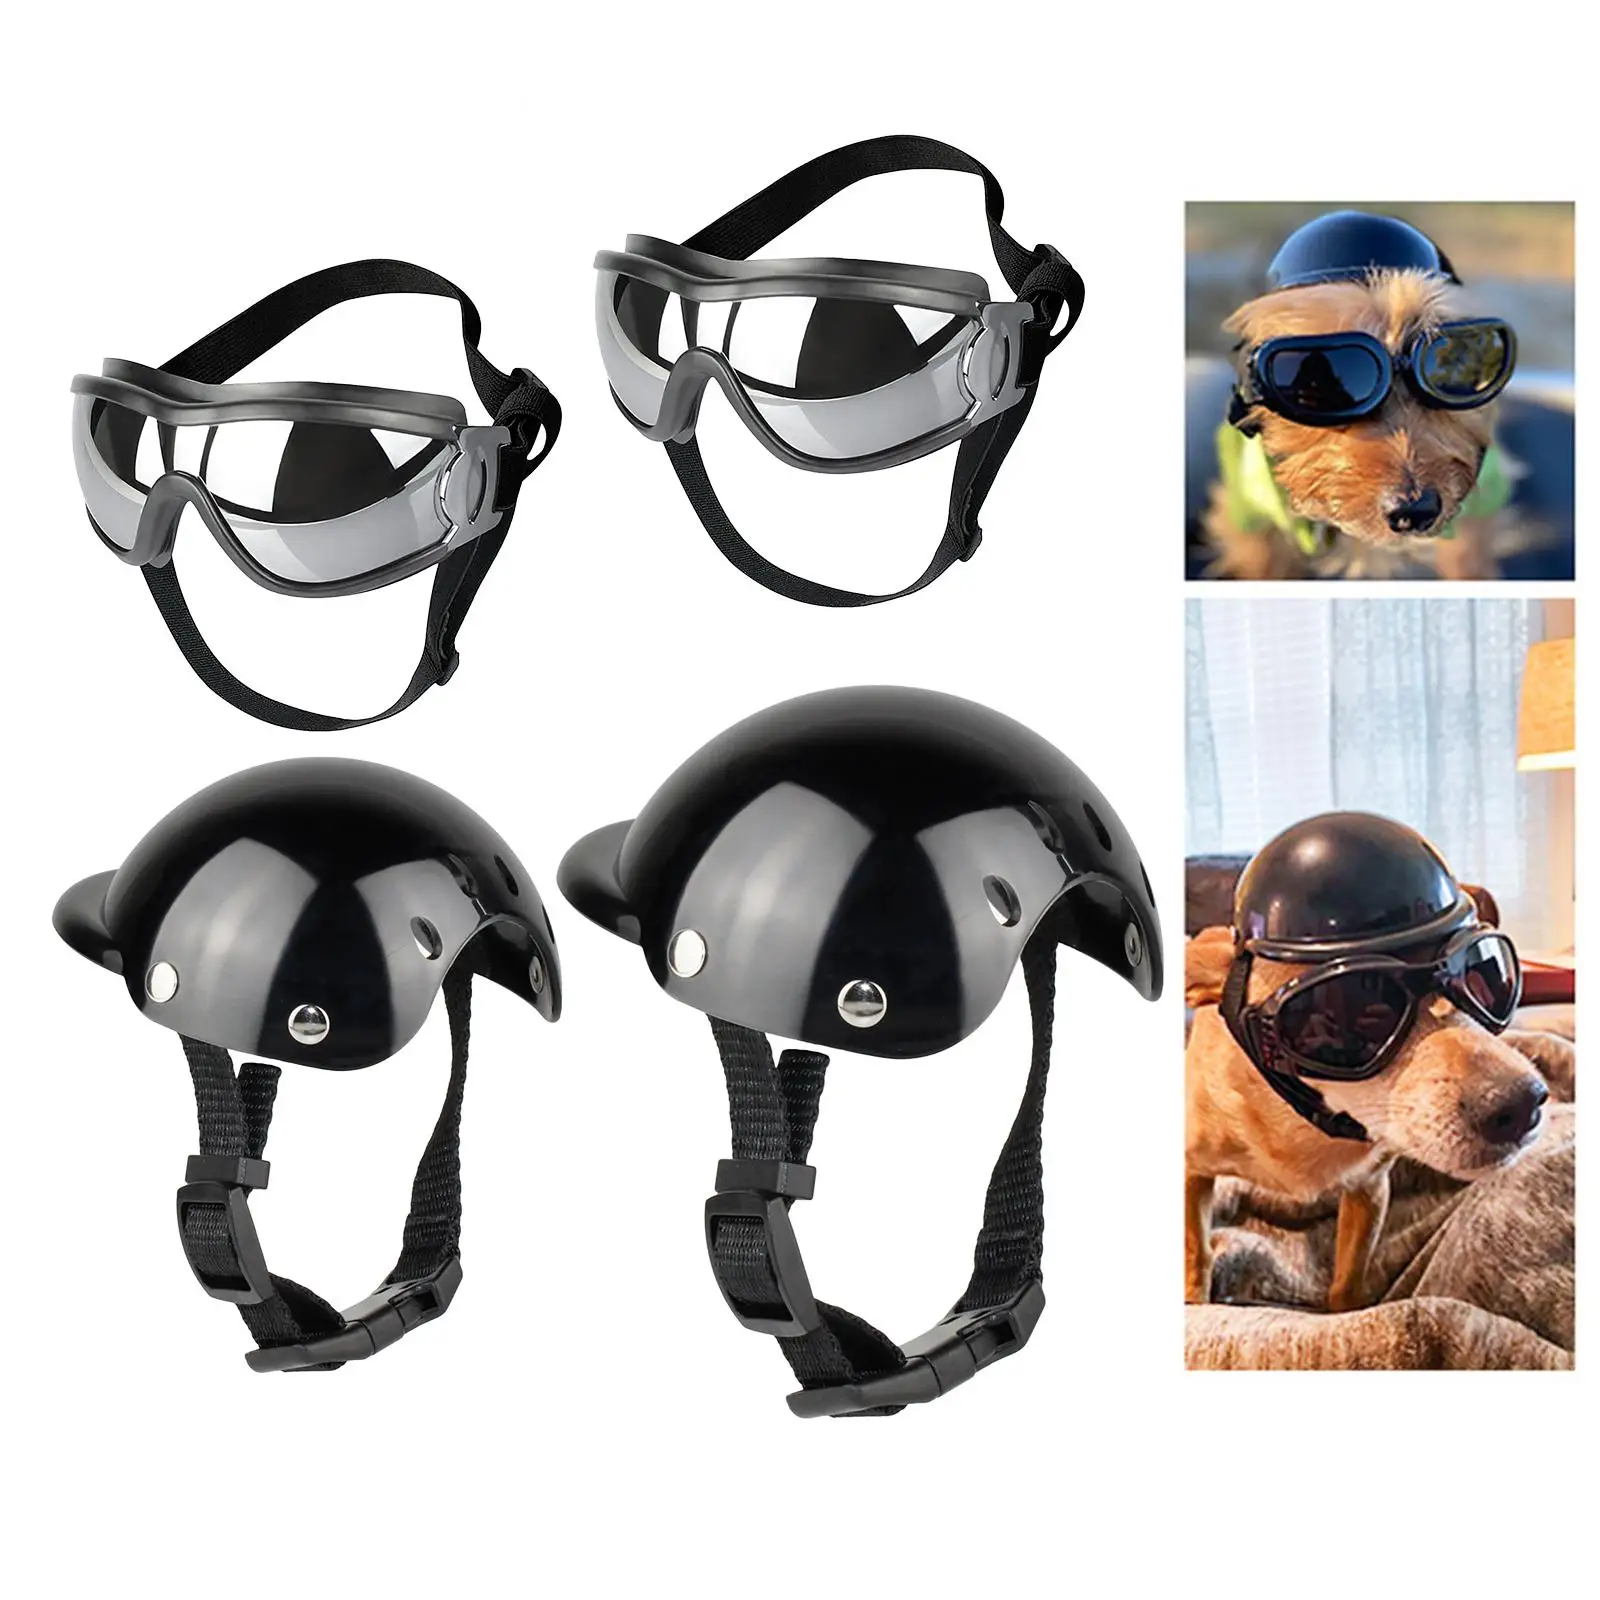  Dog Hat Breathable Sunglasses Hats Adjustable Puppy Sun Hat For Small Dogs Outdoor Walking Dogs Supplies Costumes